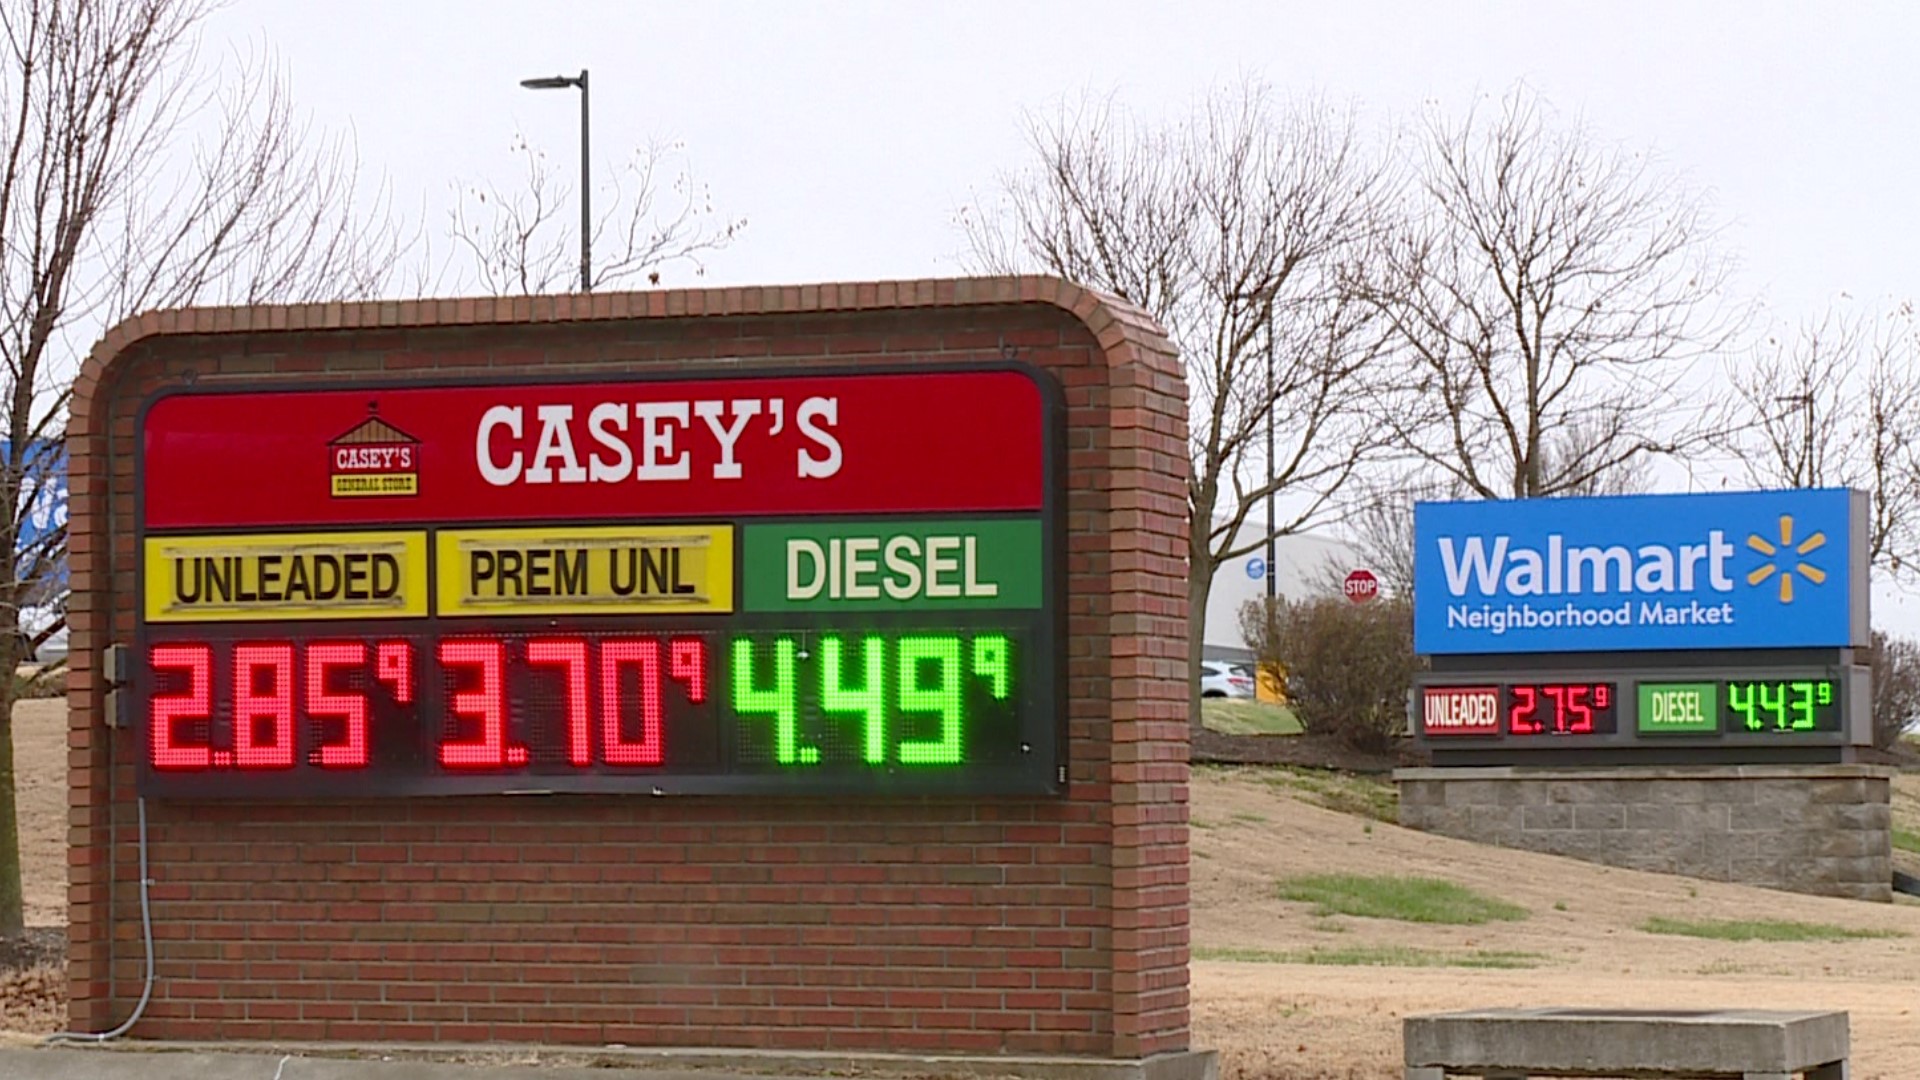 With gas prices falling, many Arkansans can save some for holiday presents, pie, and tinsel.